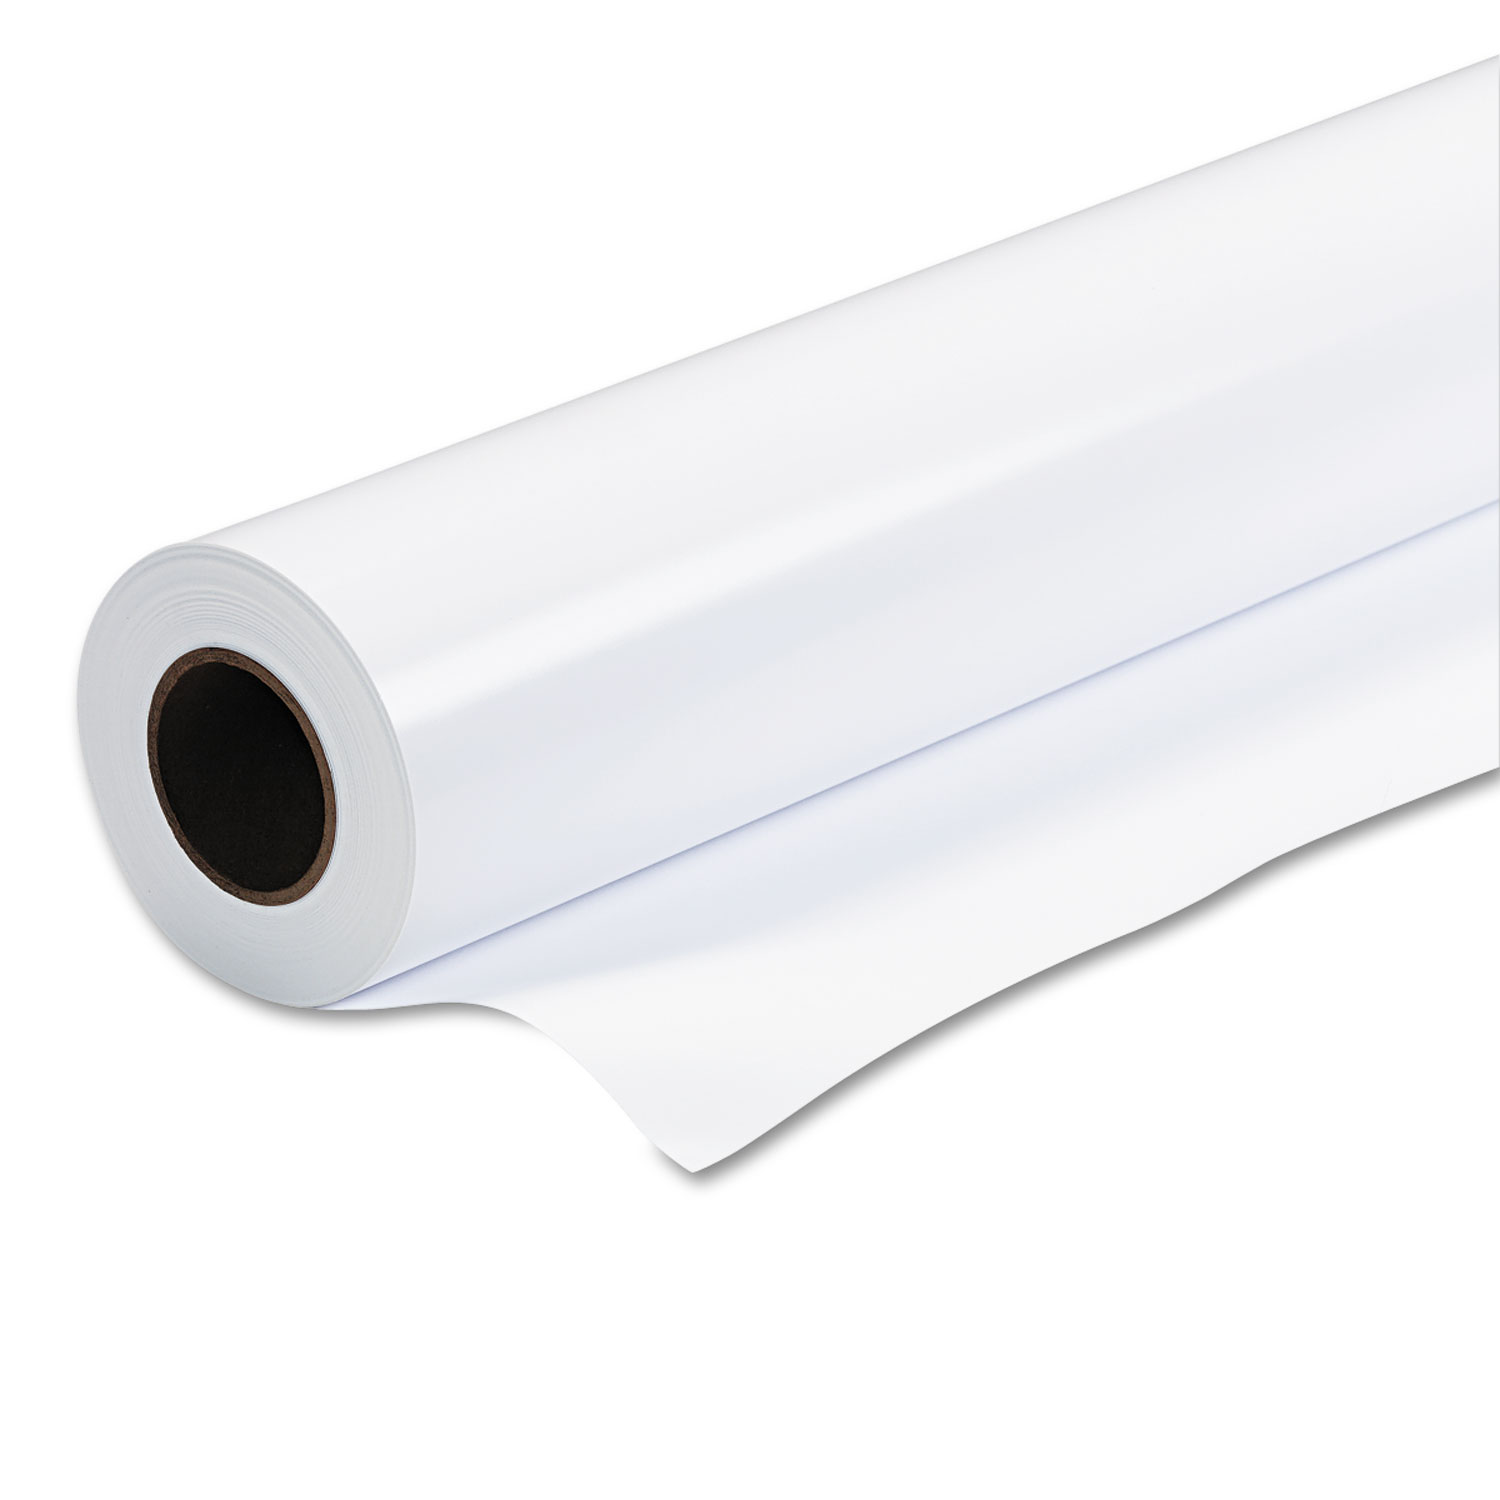 Rapid-Dry Photographic Paper, Satin, 6 mil, 42 x 100 ft Roll, White